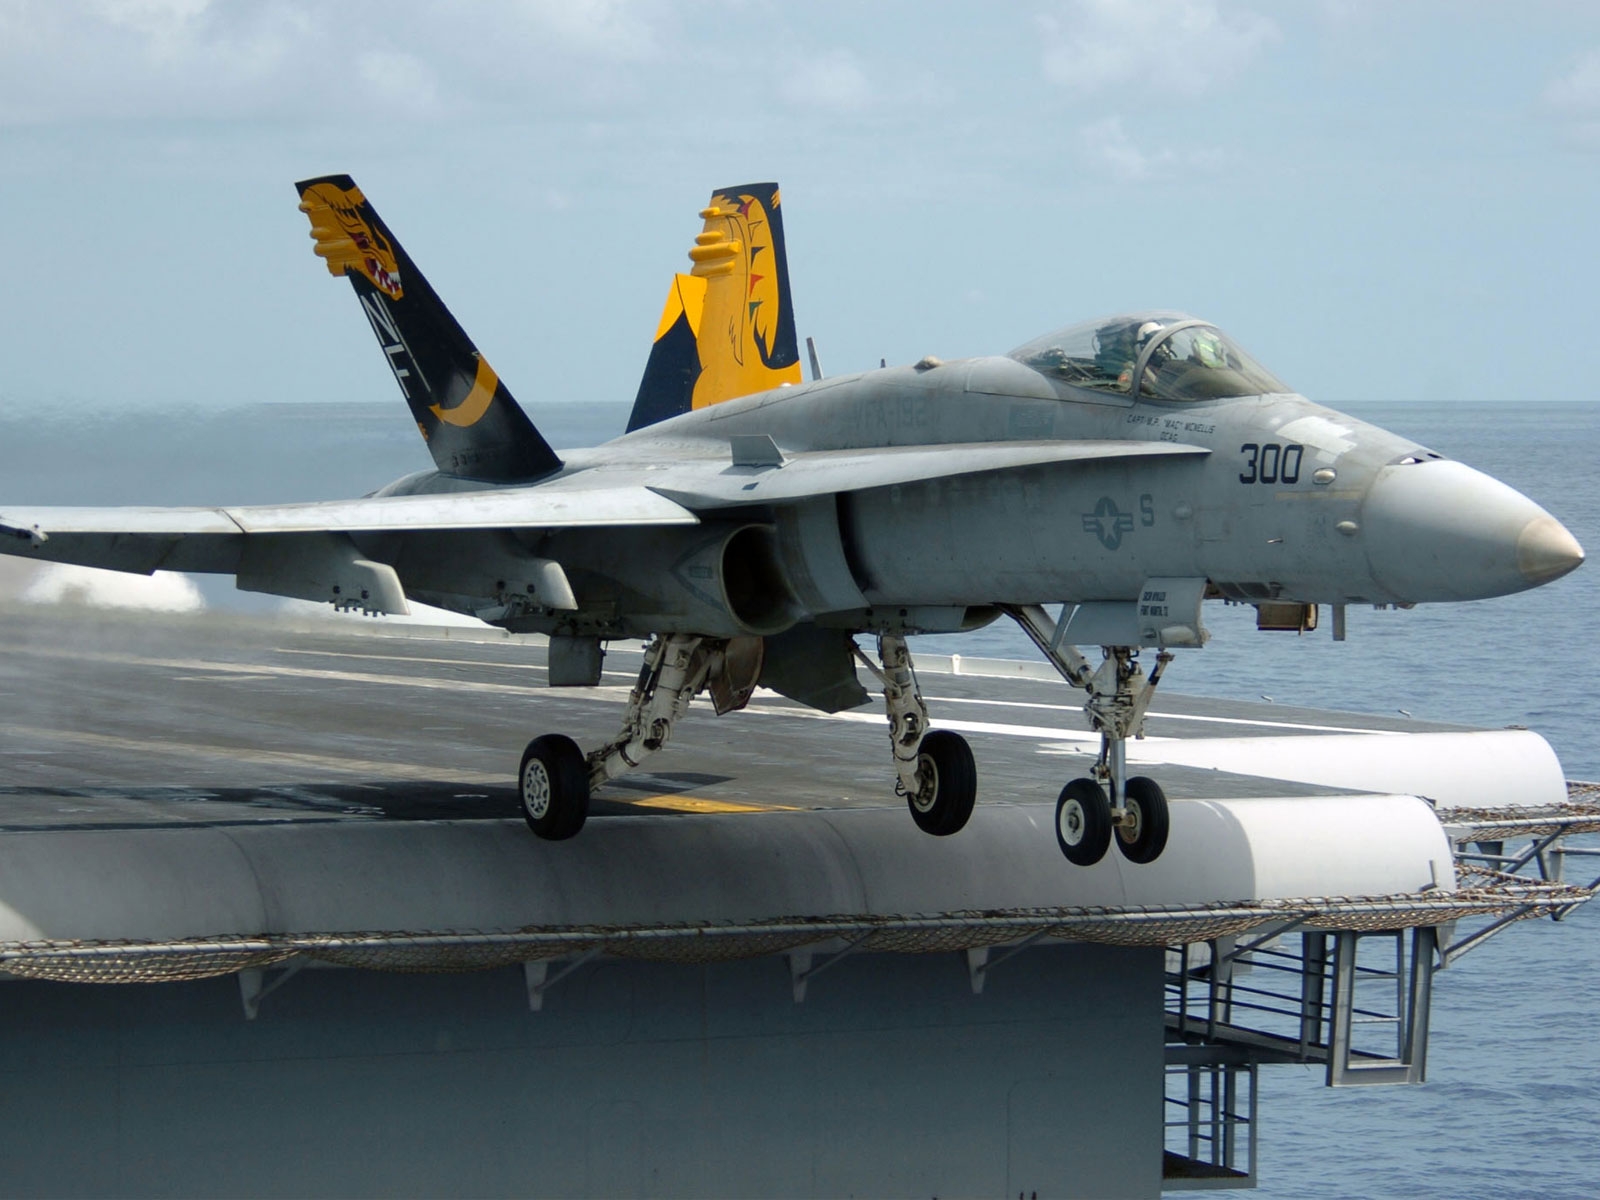 Download full size Take of from carrier Military Airplanes wallpaper / 1600x1200